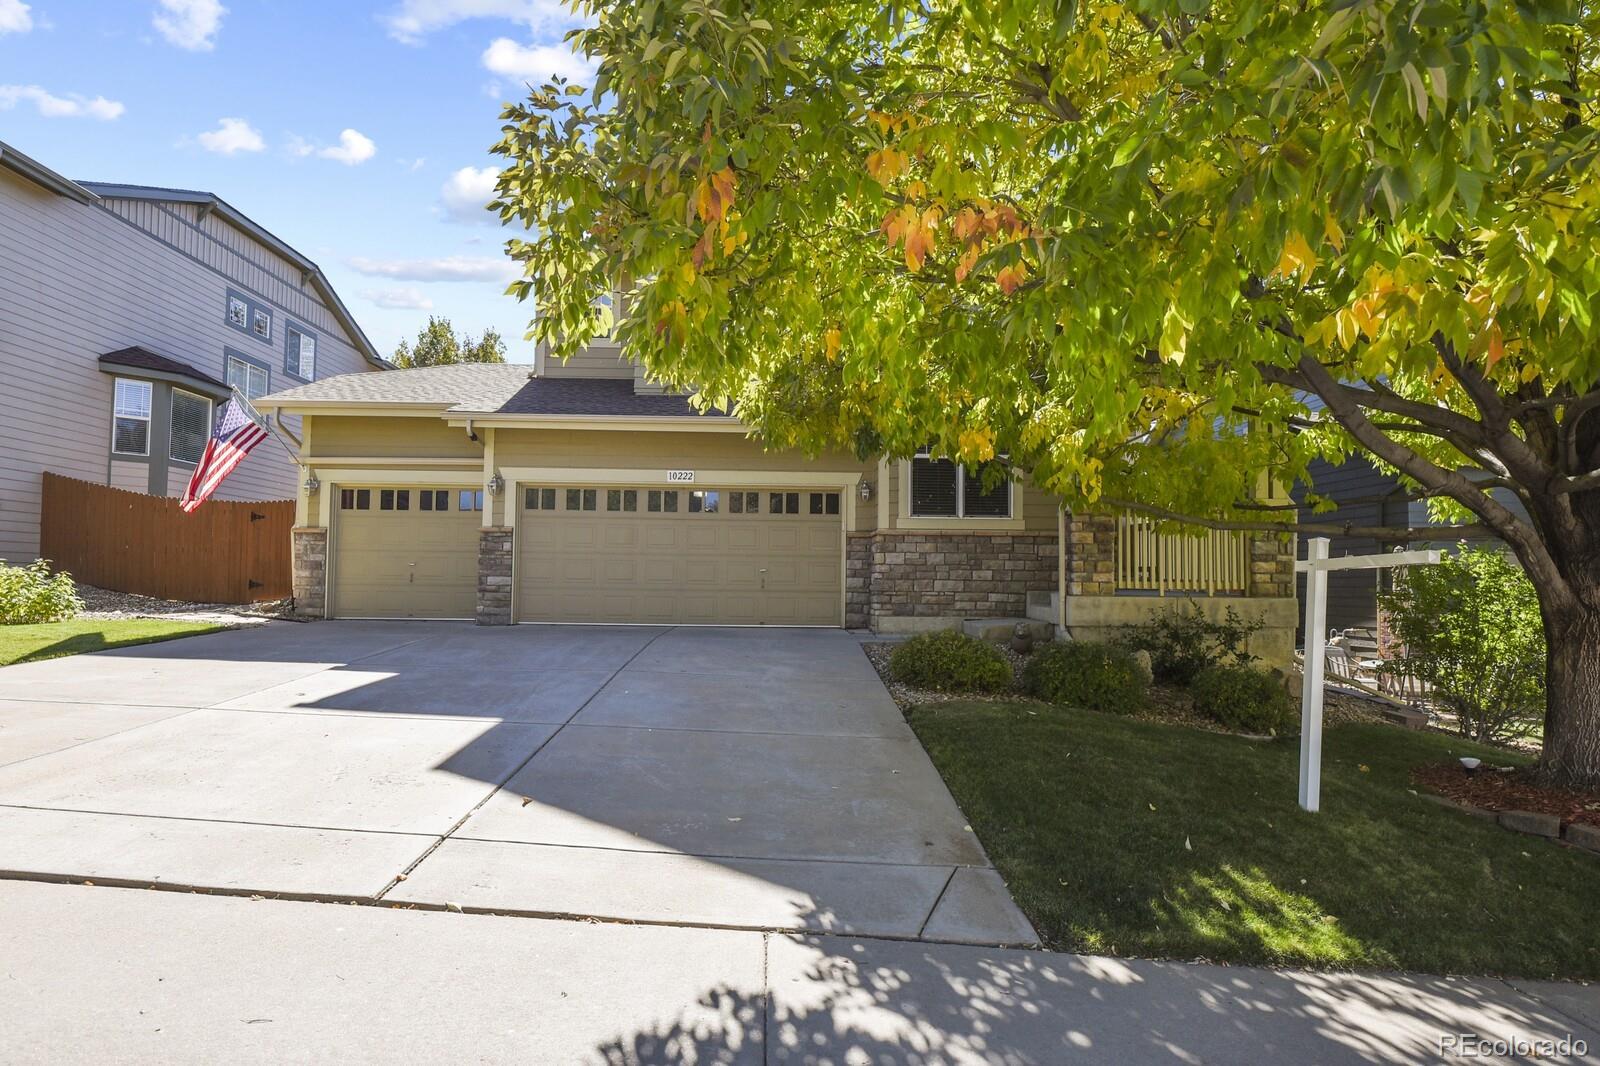 10222  cavaletti drive, littleton sold home. Closed on 2024-02-29 for $715,500.